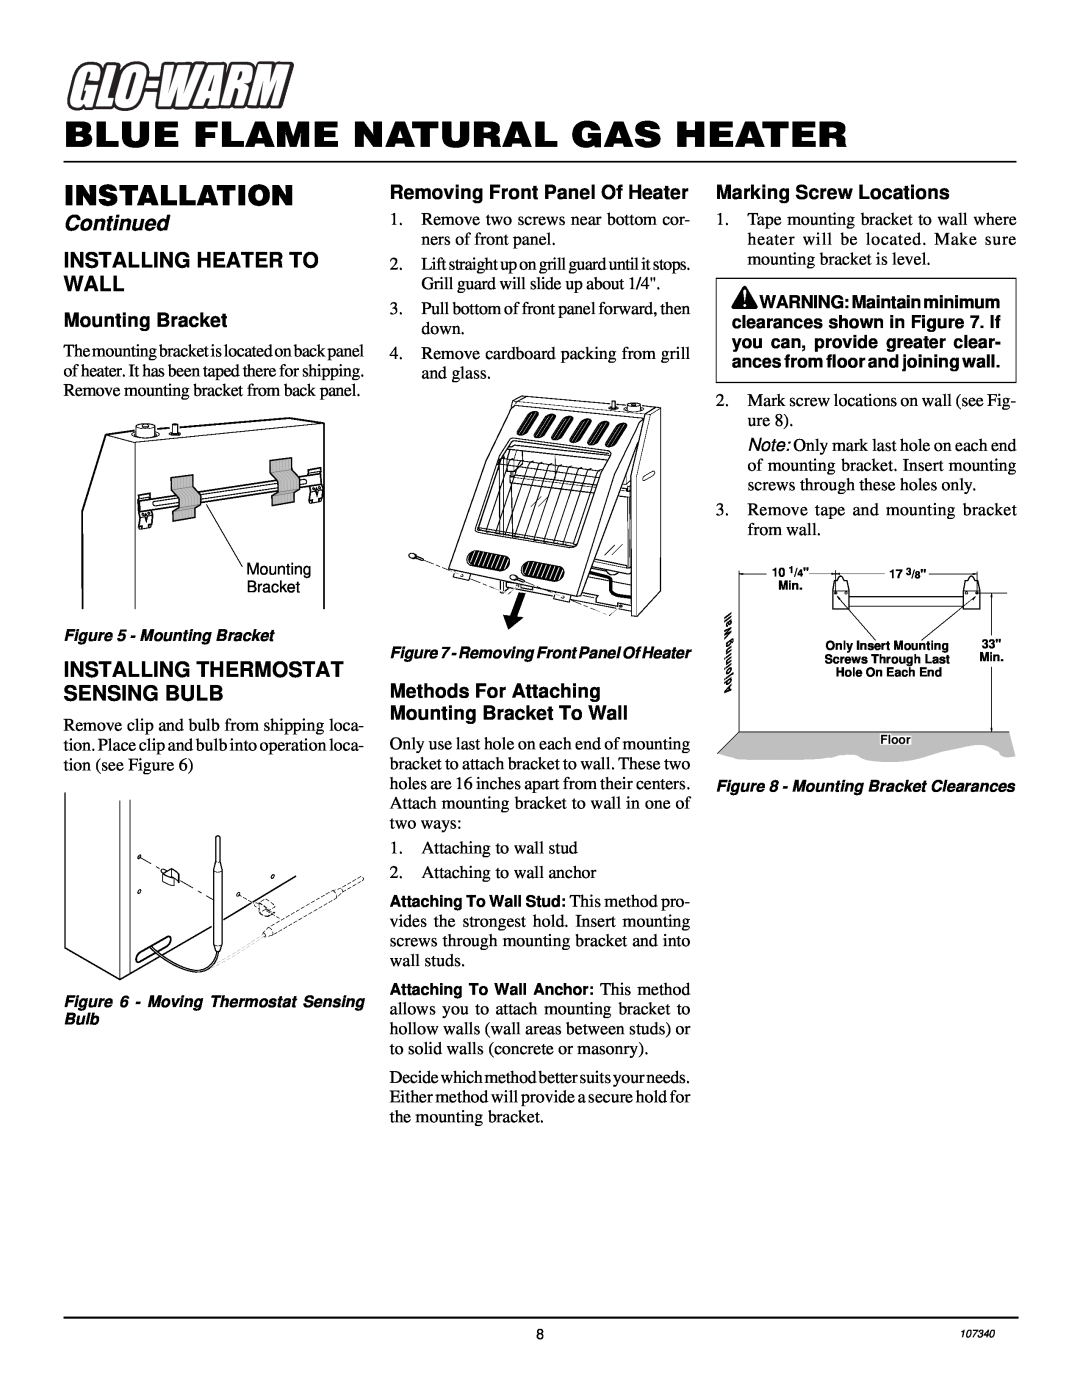 Desa FGHS30NGB Installing Heater To Wall, Installing Thermostat Sensing Bulb, Mounting Bracket, Marking Screw Locations 